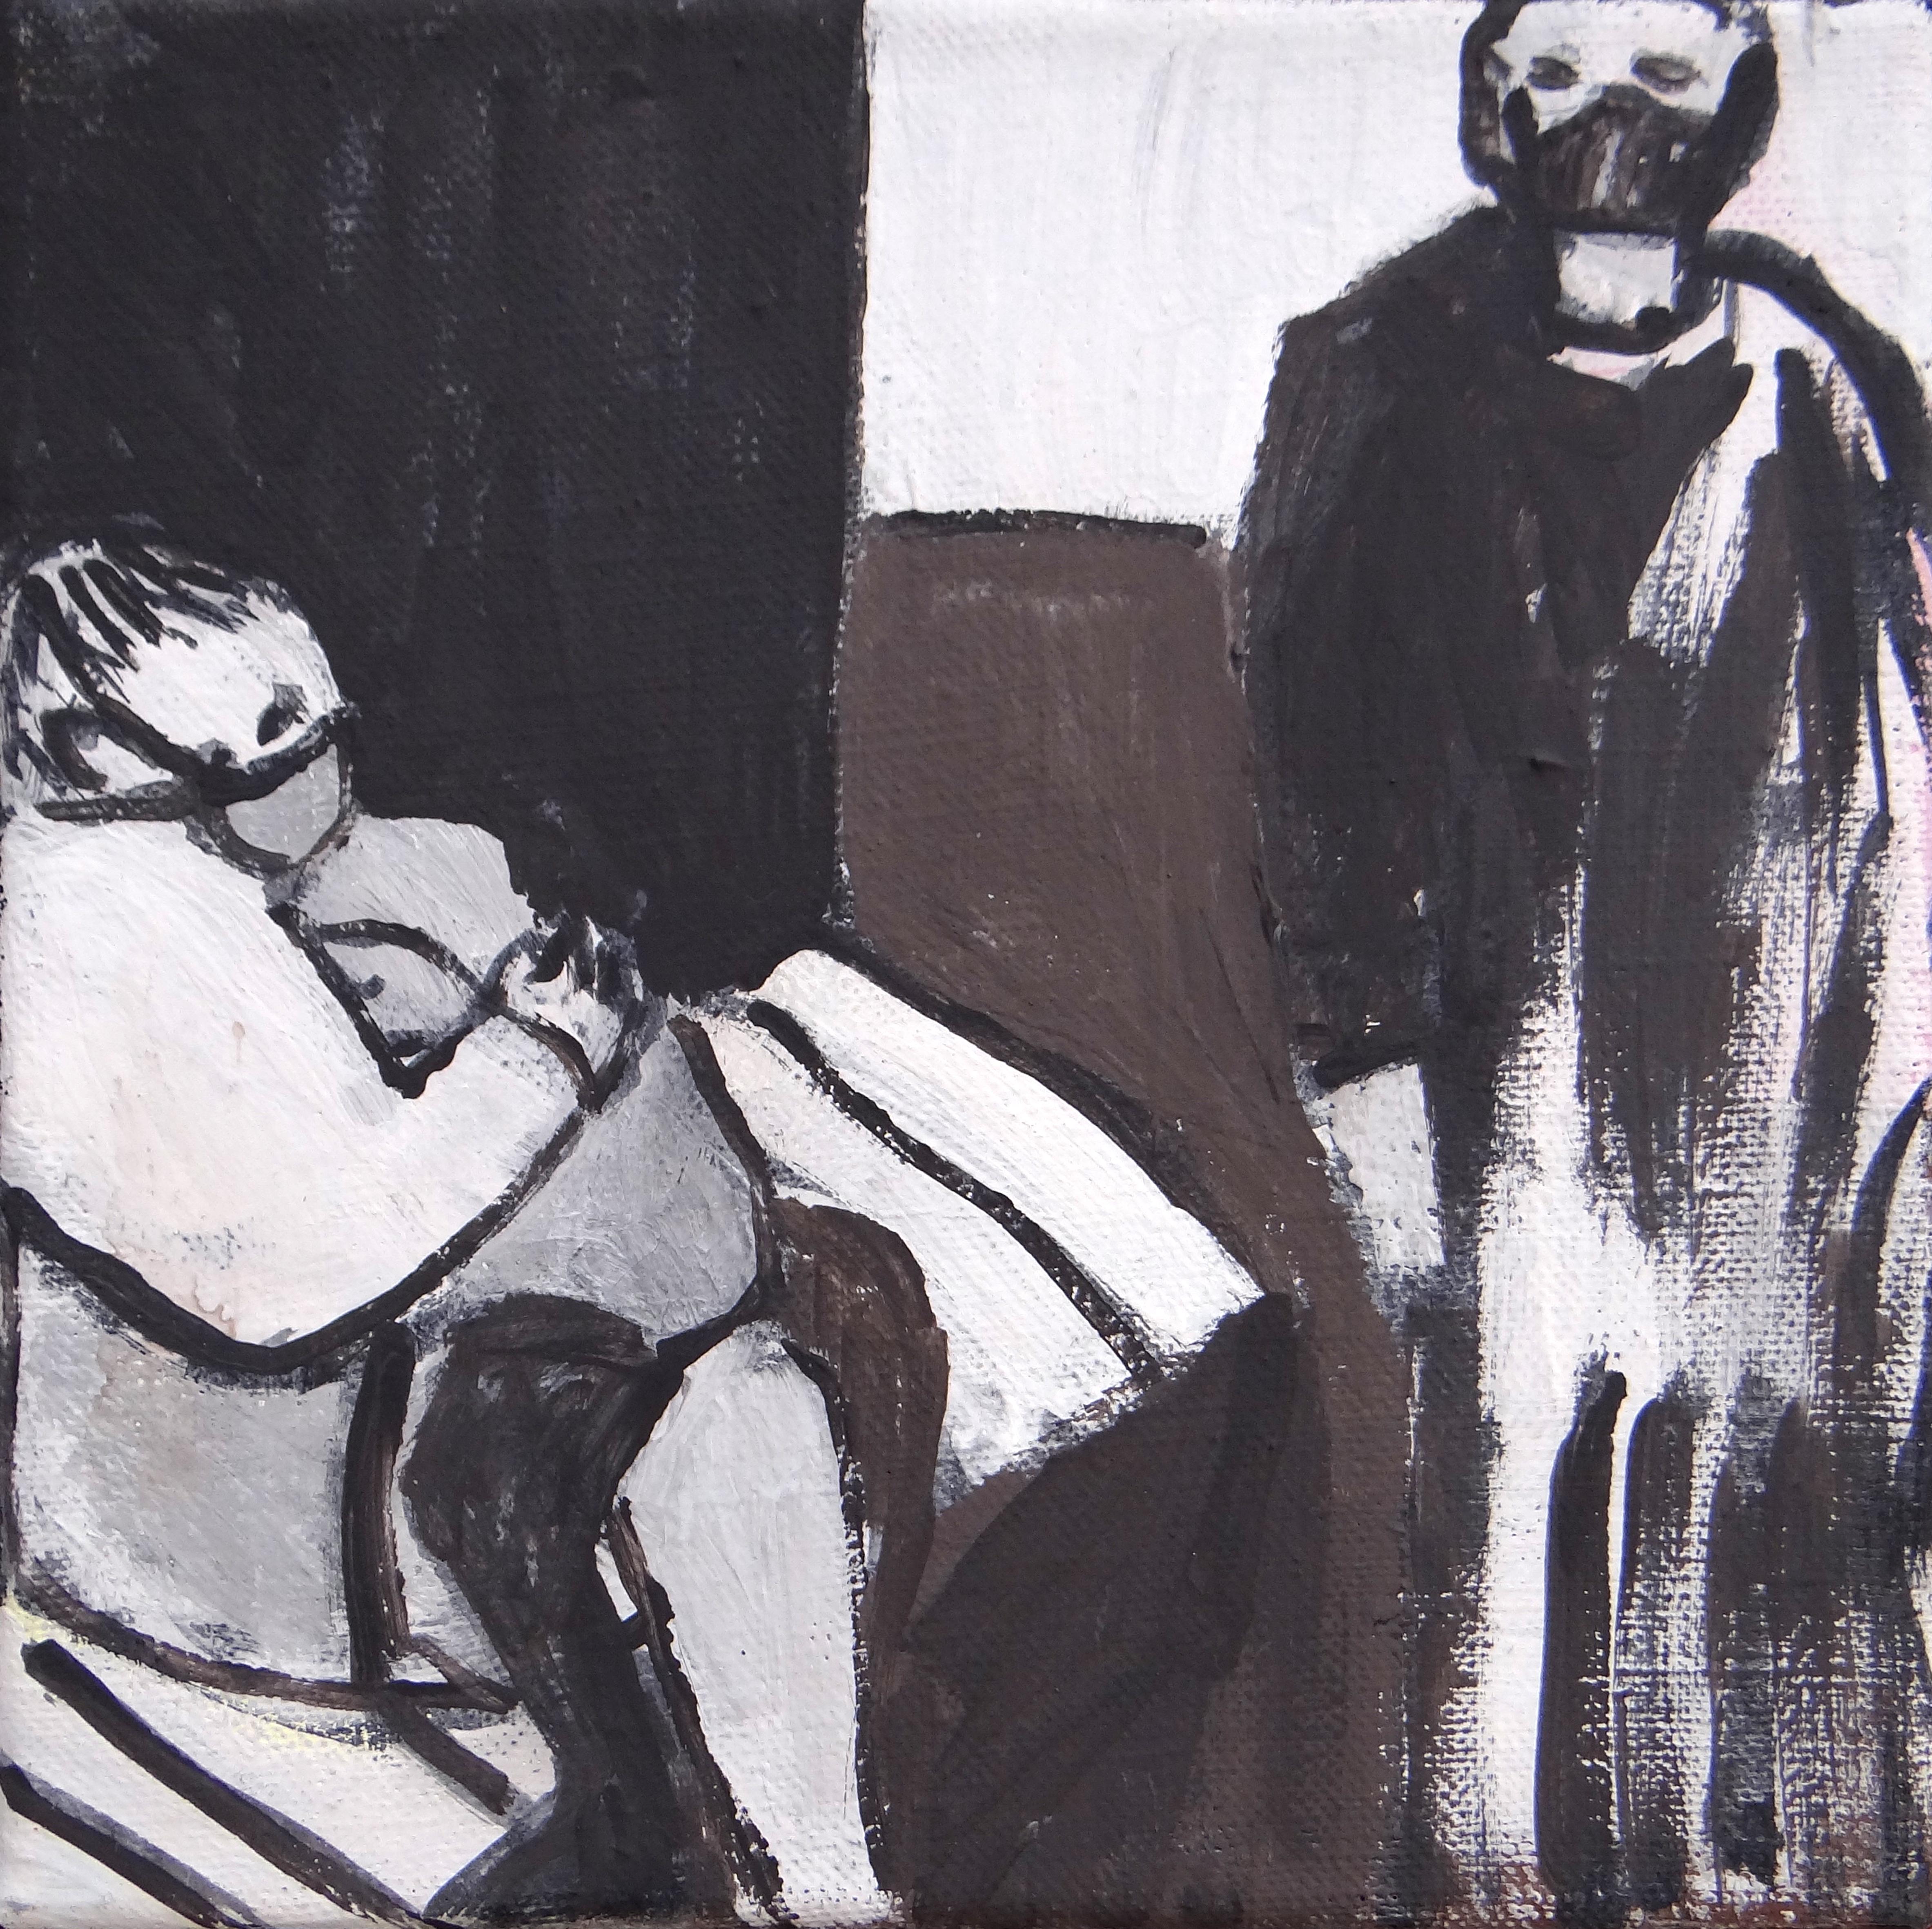 Joanna Mrozowska Figurative Painting – Waiting Room 1 - Contemporary Expressive Symbolic Black-White and Brown Painting